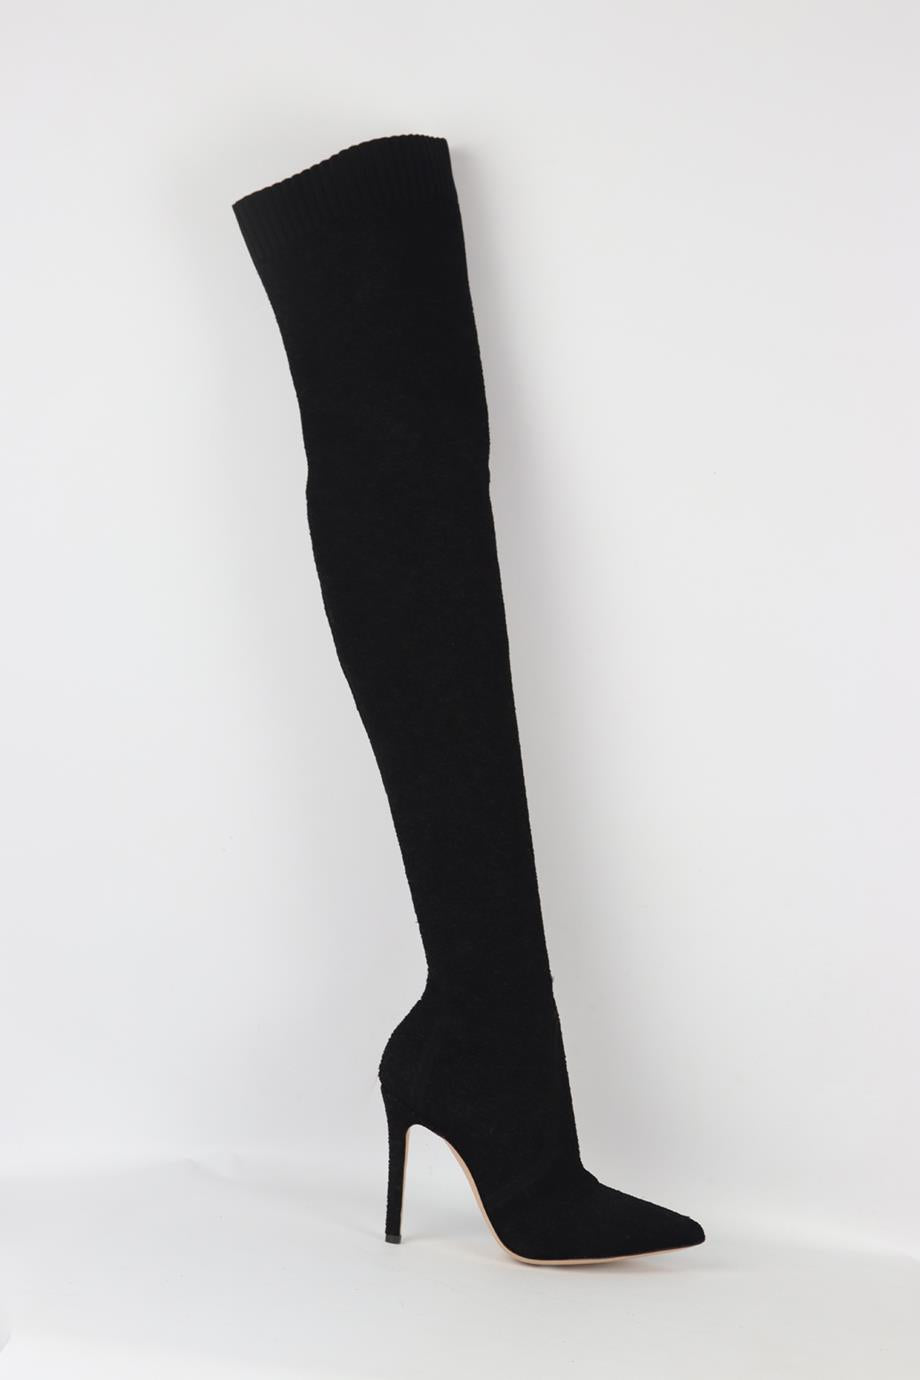 GIANVITO ROSSI STRETCH KNIT OVER THE KNEE BOOTS EU 38 UK 5 US 8